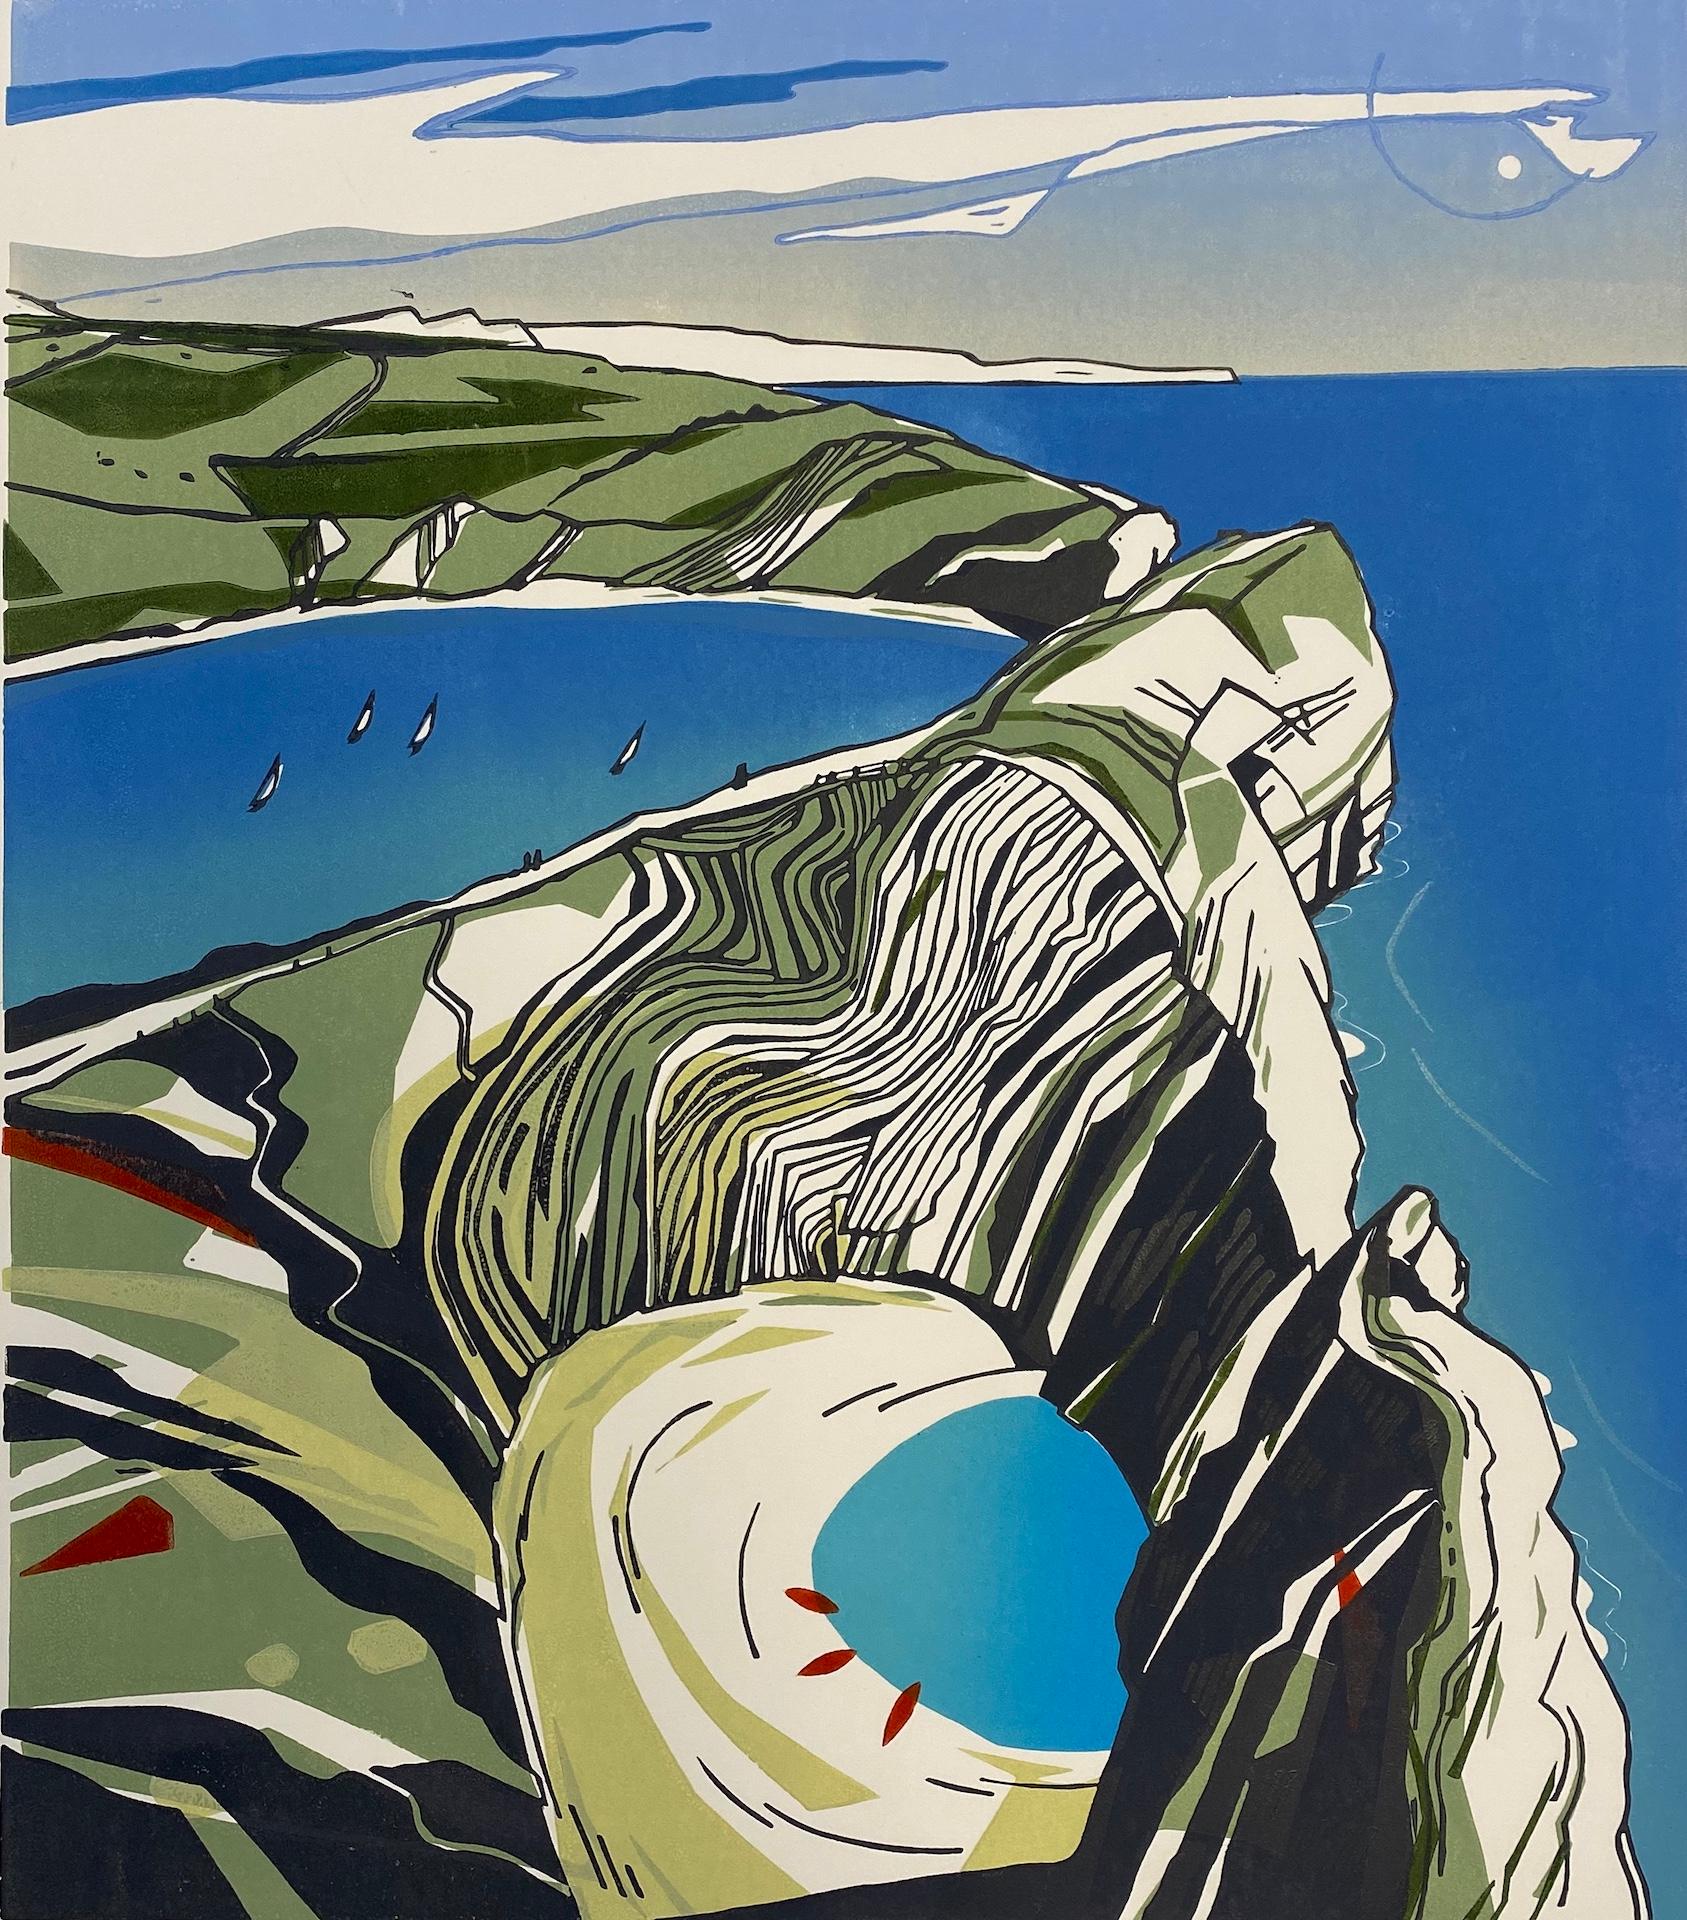 
Stair Hole, Lulworth is a limited edition print by Colin Moore. This print depicts the stunning scenery of Stair Hole cove in Dorset. The details and pattern of the rocks and landscape give extra depth and interest to this print.
Colin Moore is